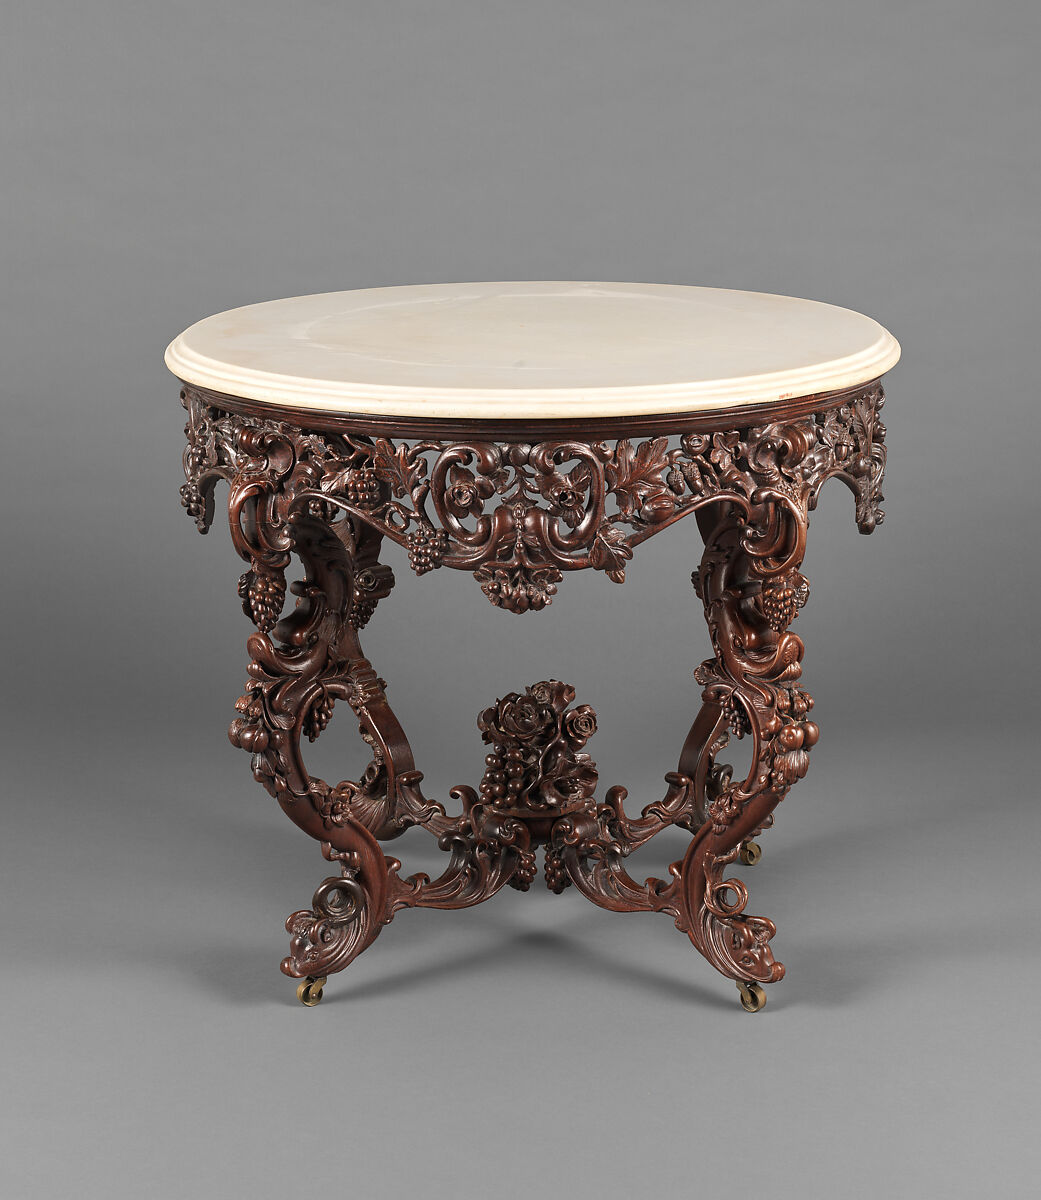 Center table, Attributed to John Henry Belter (American, born Germany 1804-1863 New York), Rosewood, marble, American 